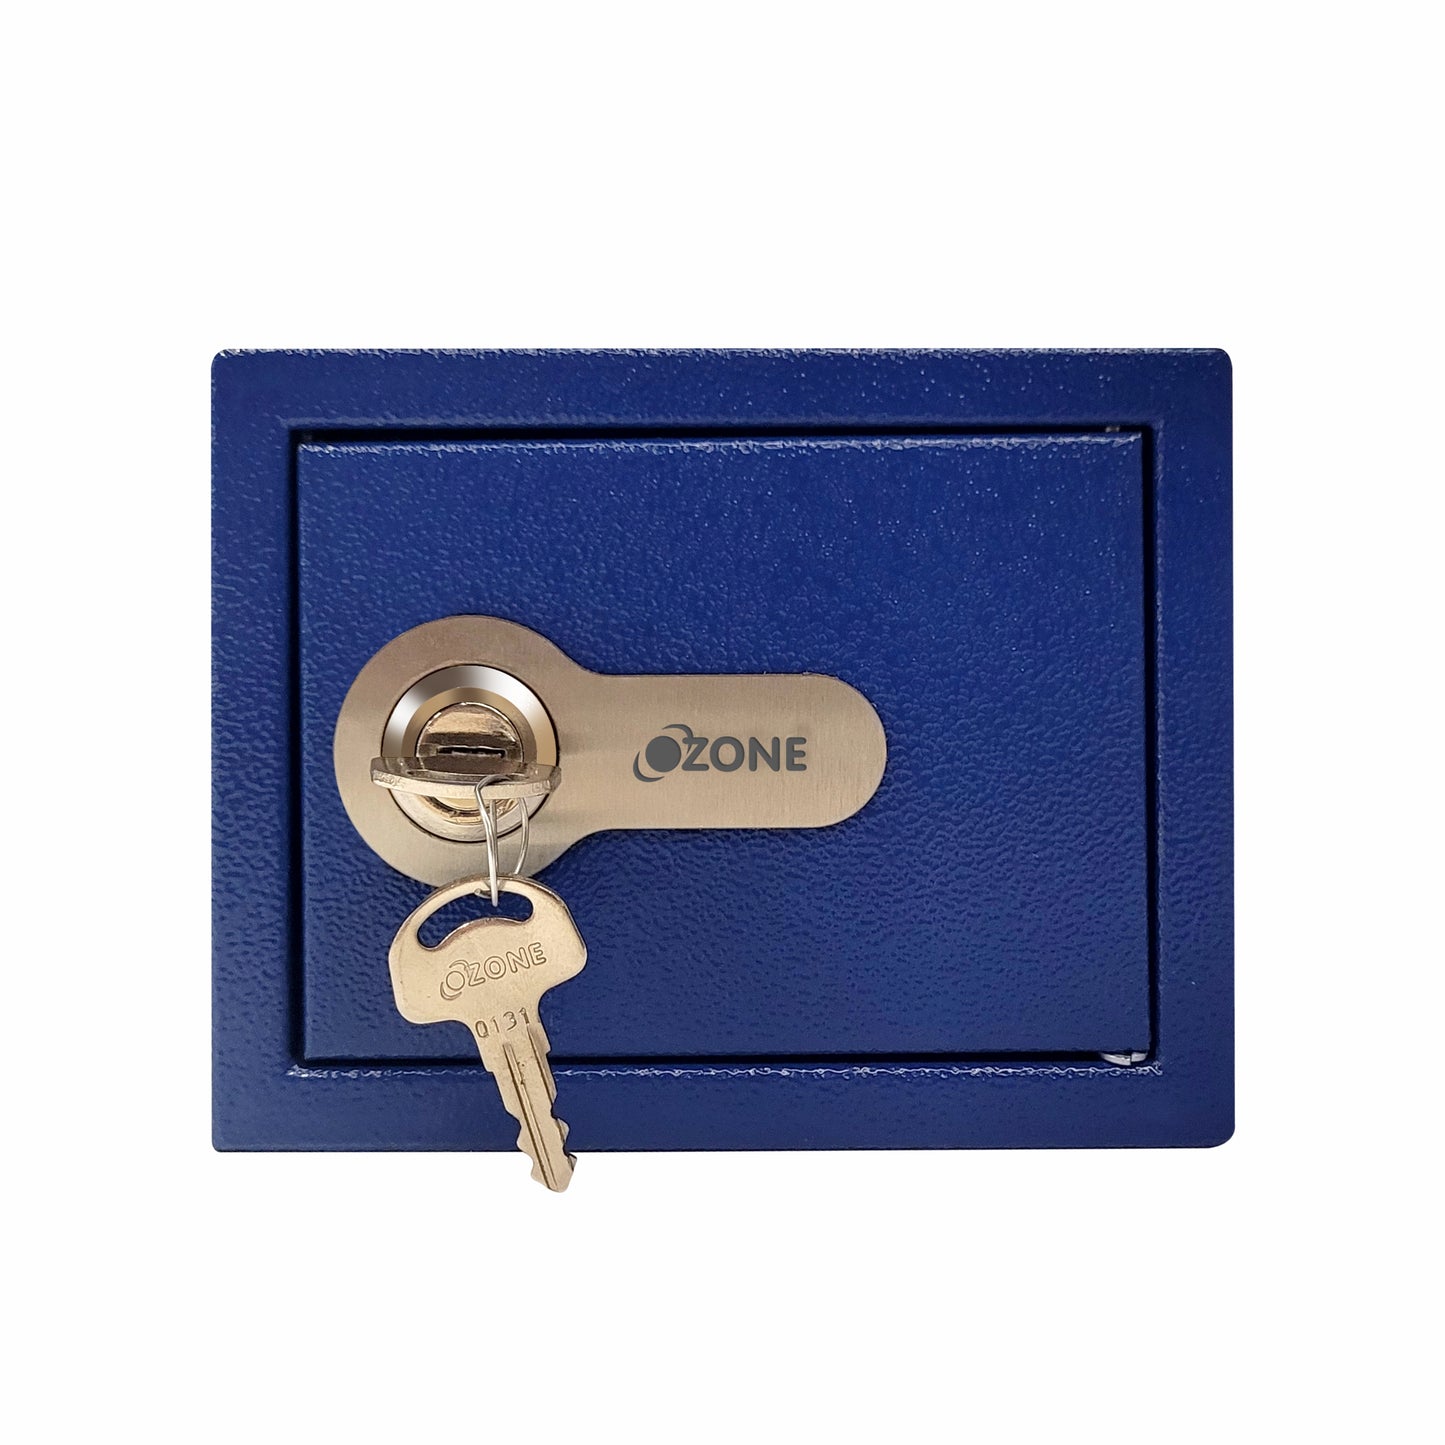 Ozone Compact Safe for Kids with Mechanical Key in Blue and White colours (2 Ltrs.)